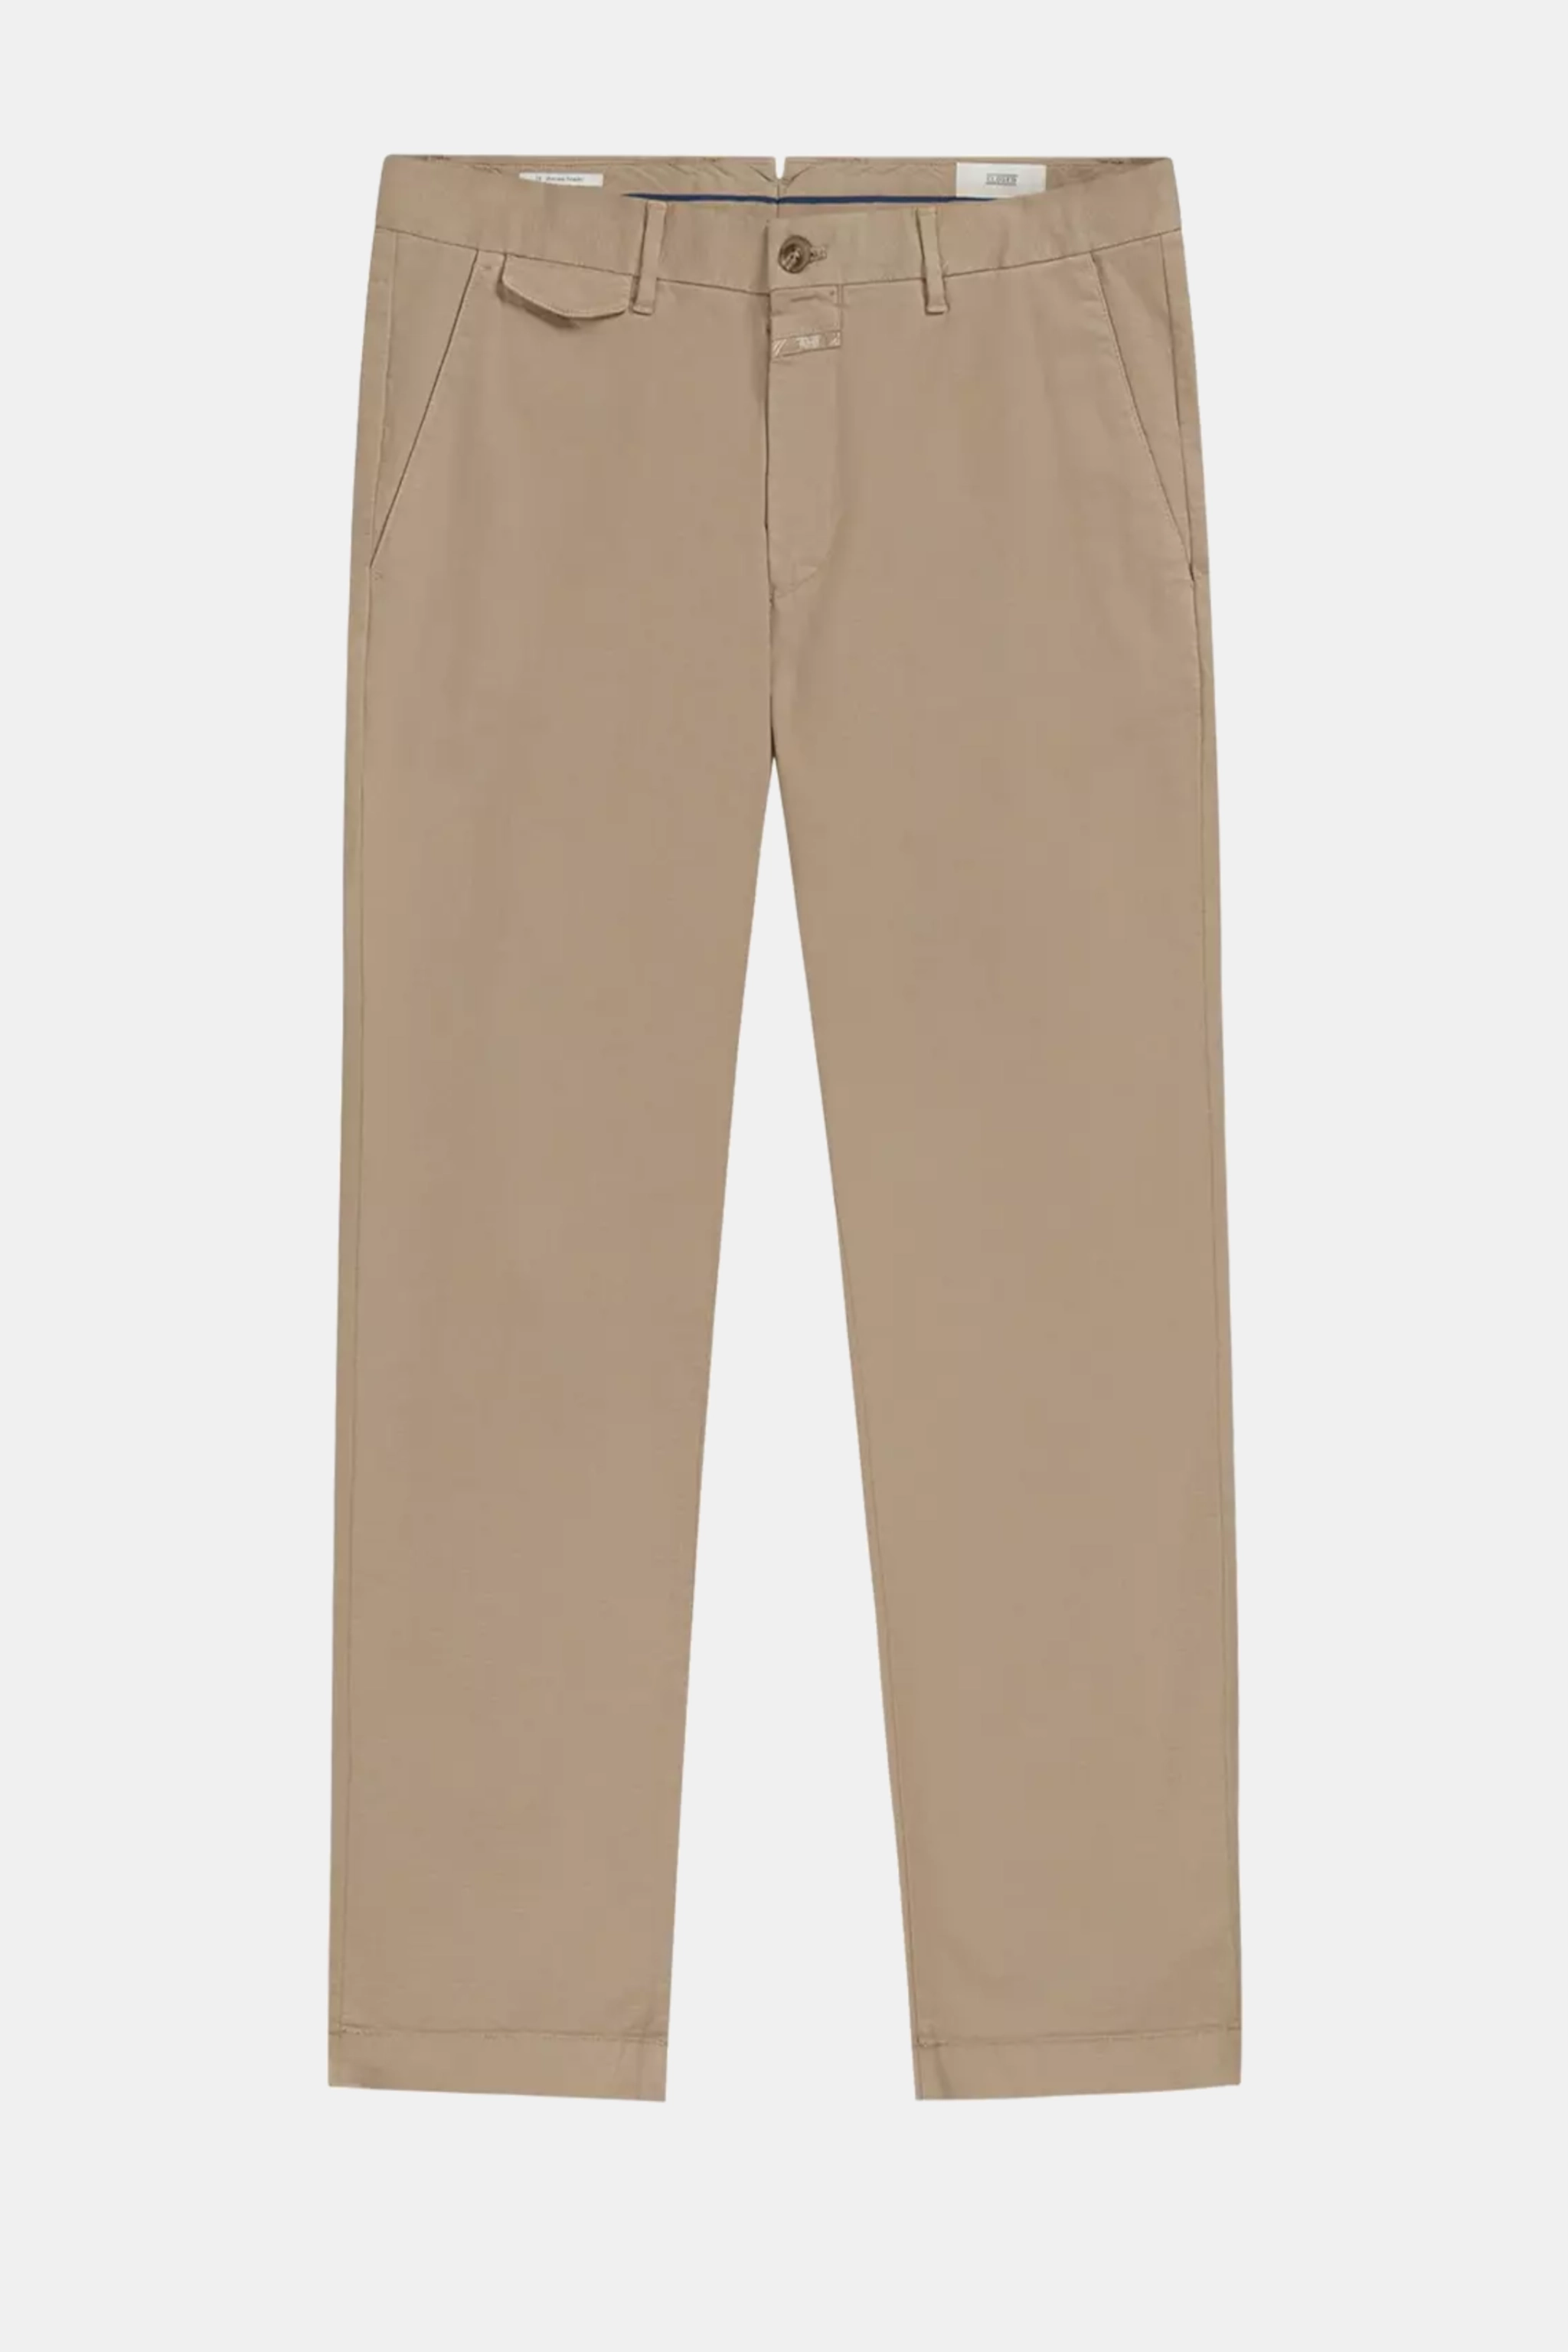 CLOSED Closed - Pantalon Atelier Tapered - Coton - Beige African Sand